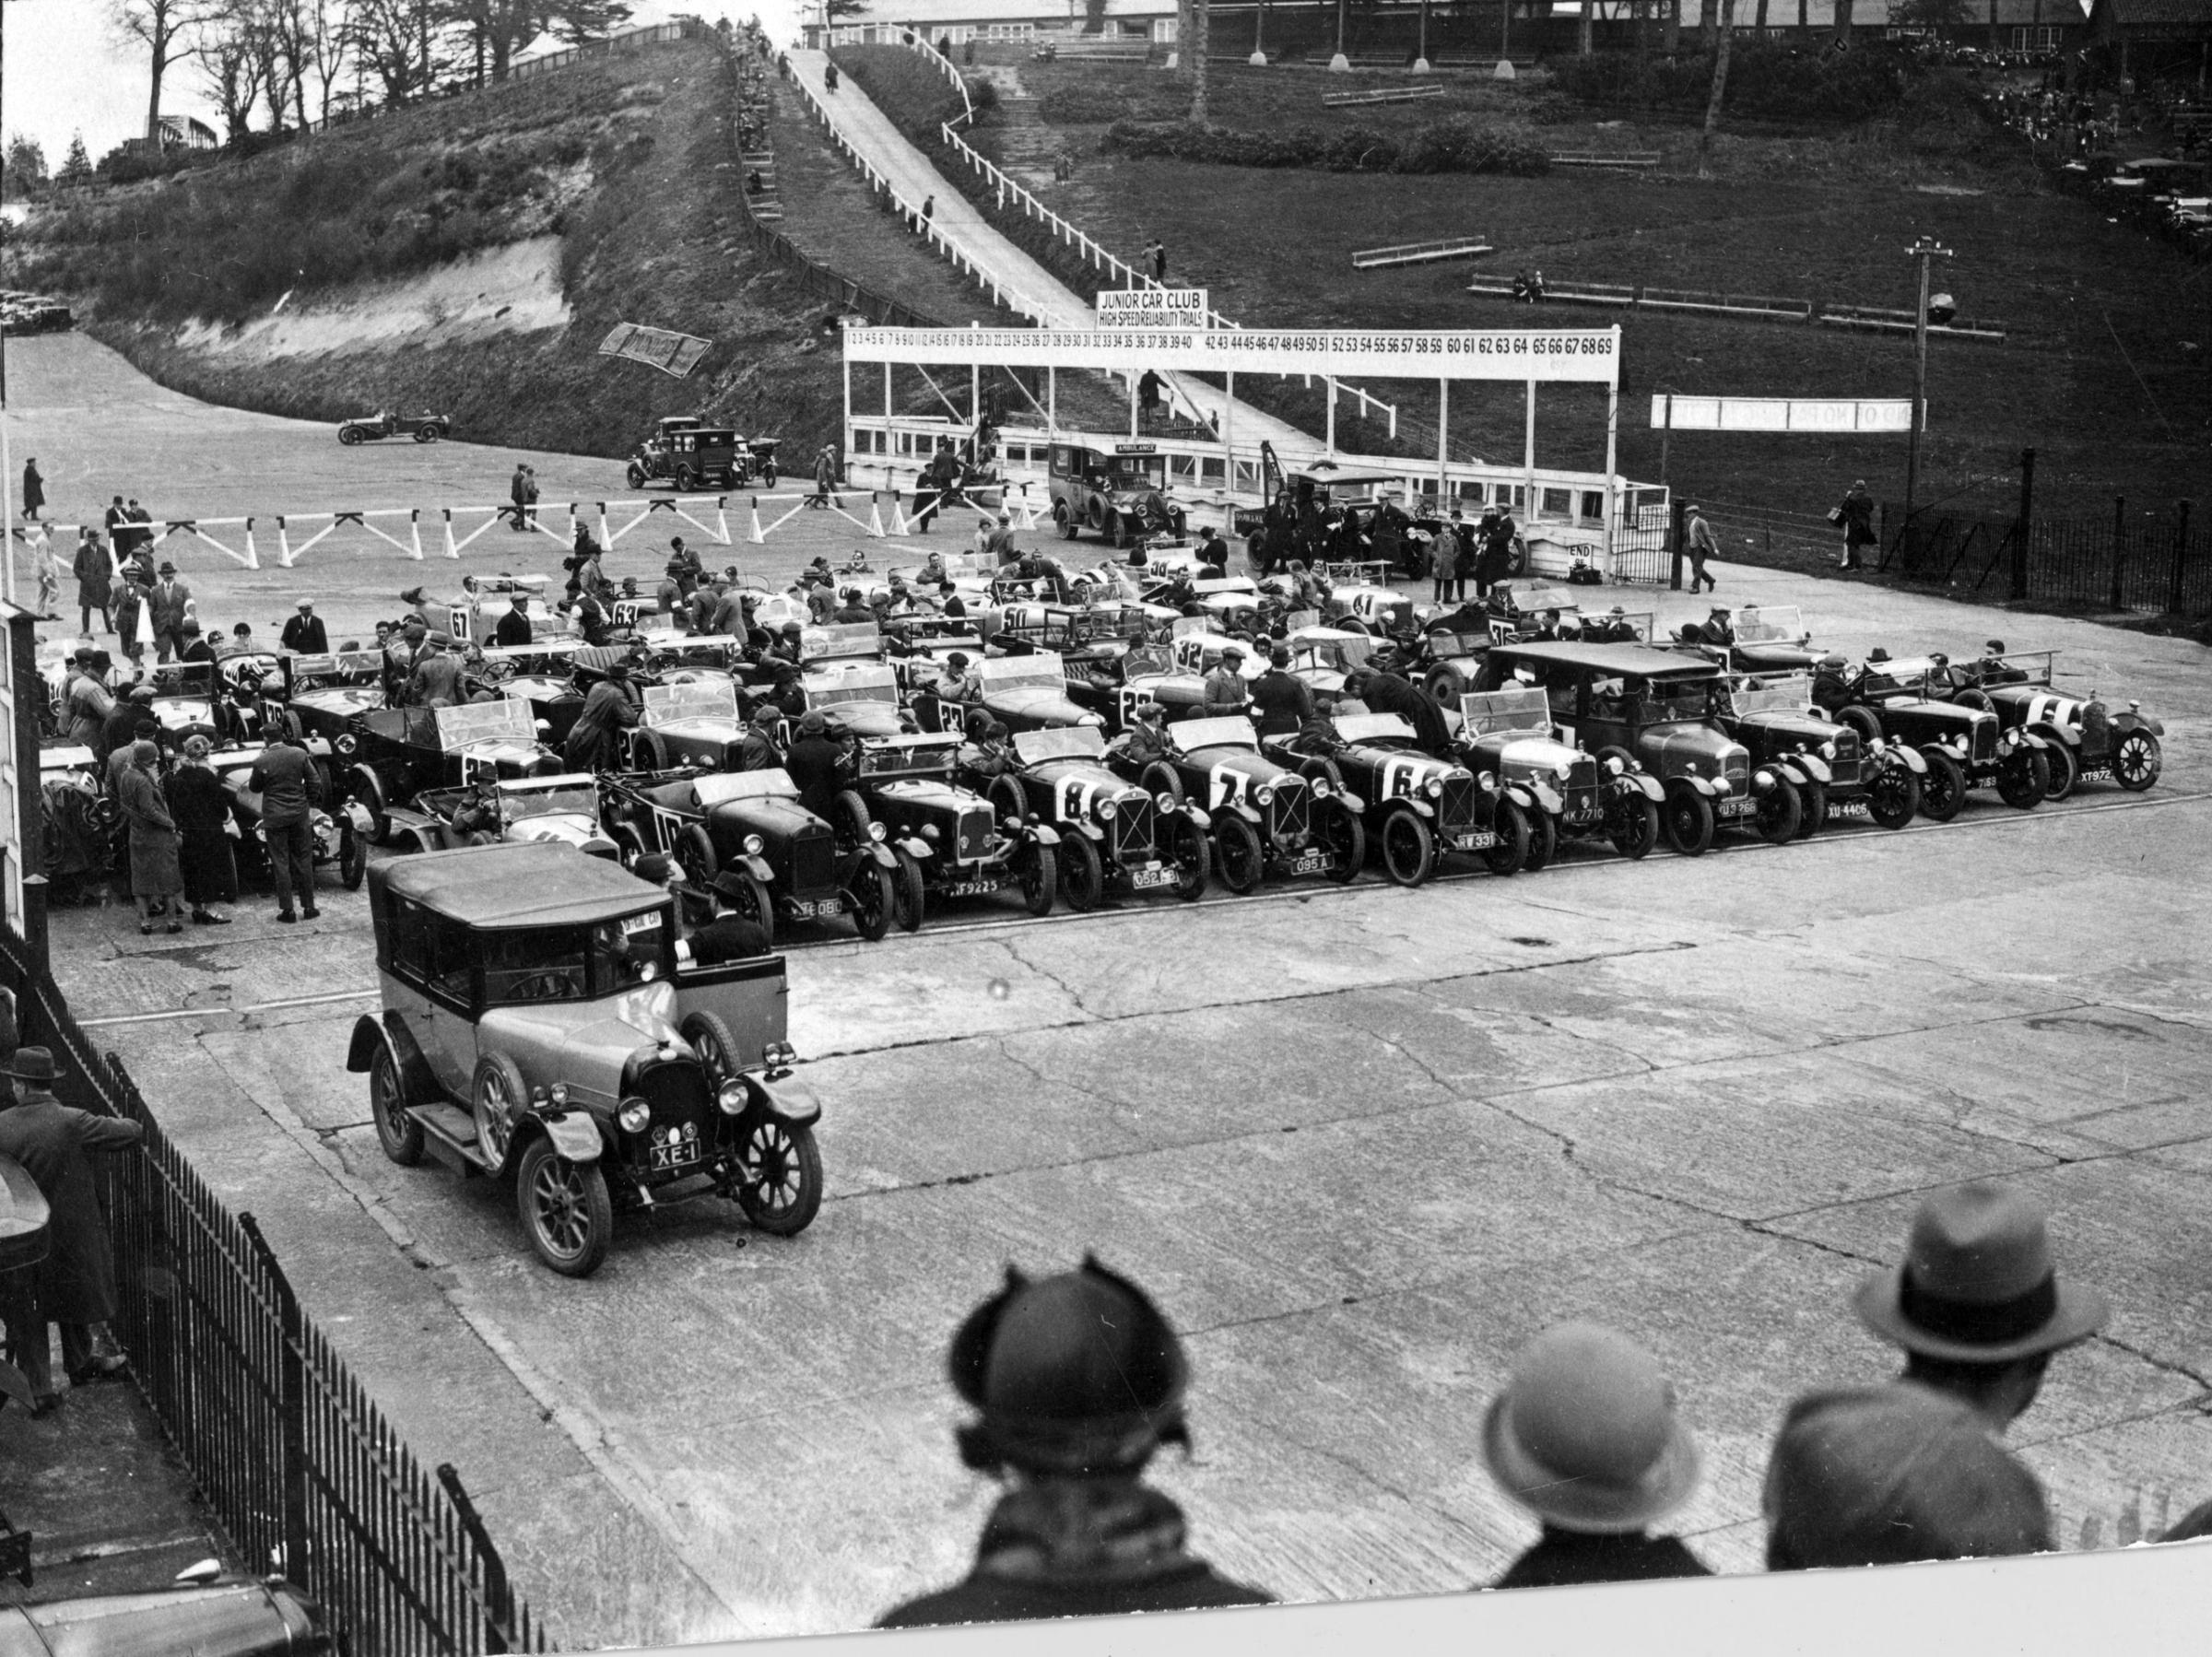 58 light cars starting the 100 miles high speed reliability trials at Brooklands, Weybridge, Surrey, England. May 1925.